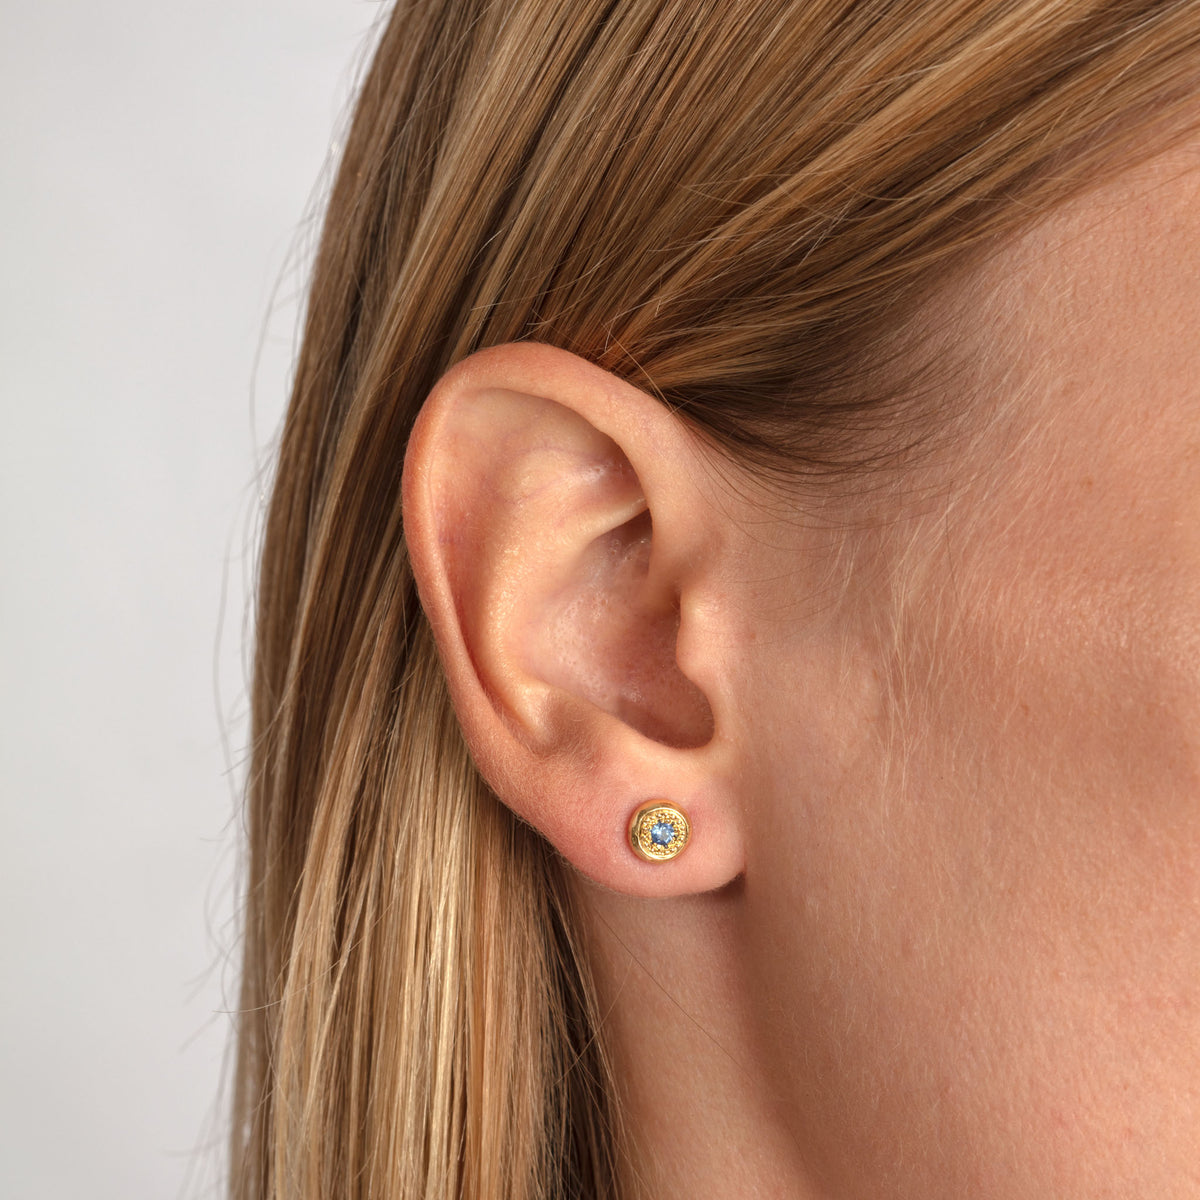 MODERN PAVE  Large Stud Earrings in Gold